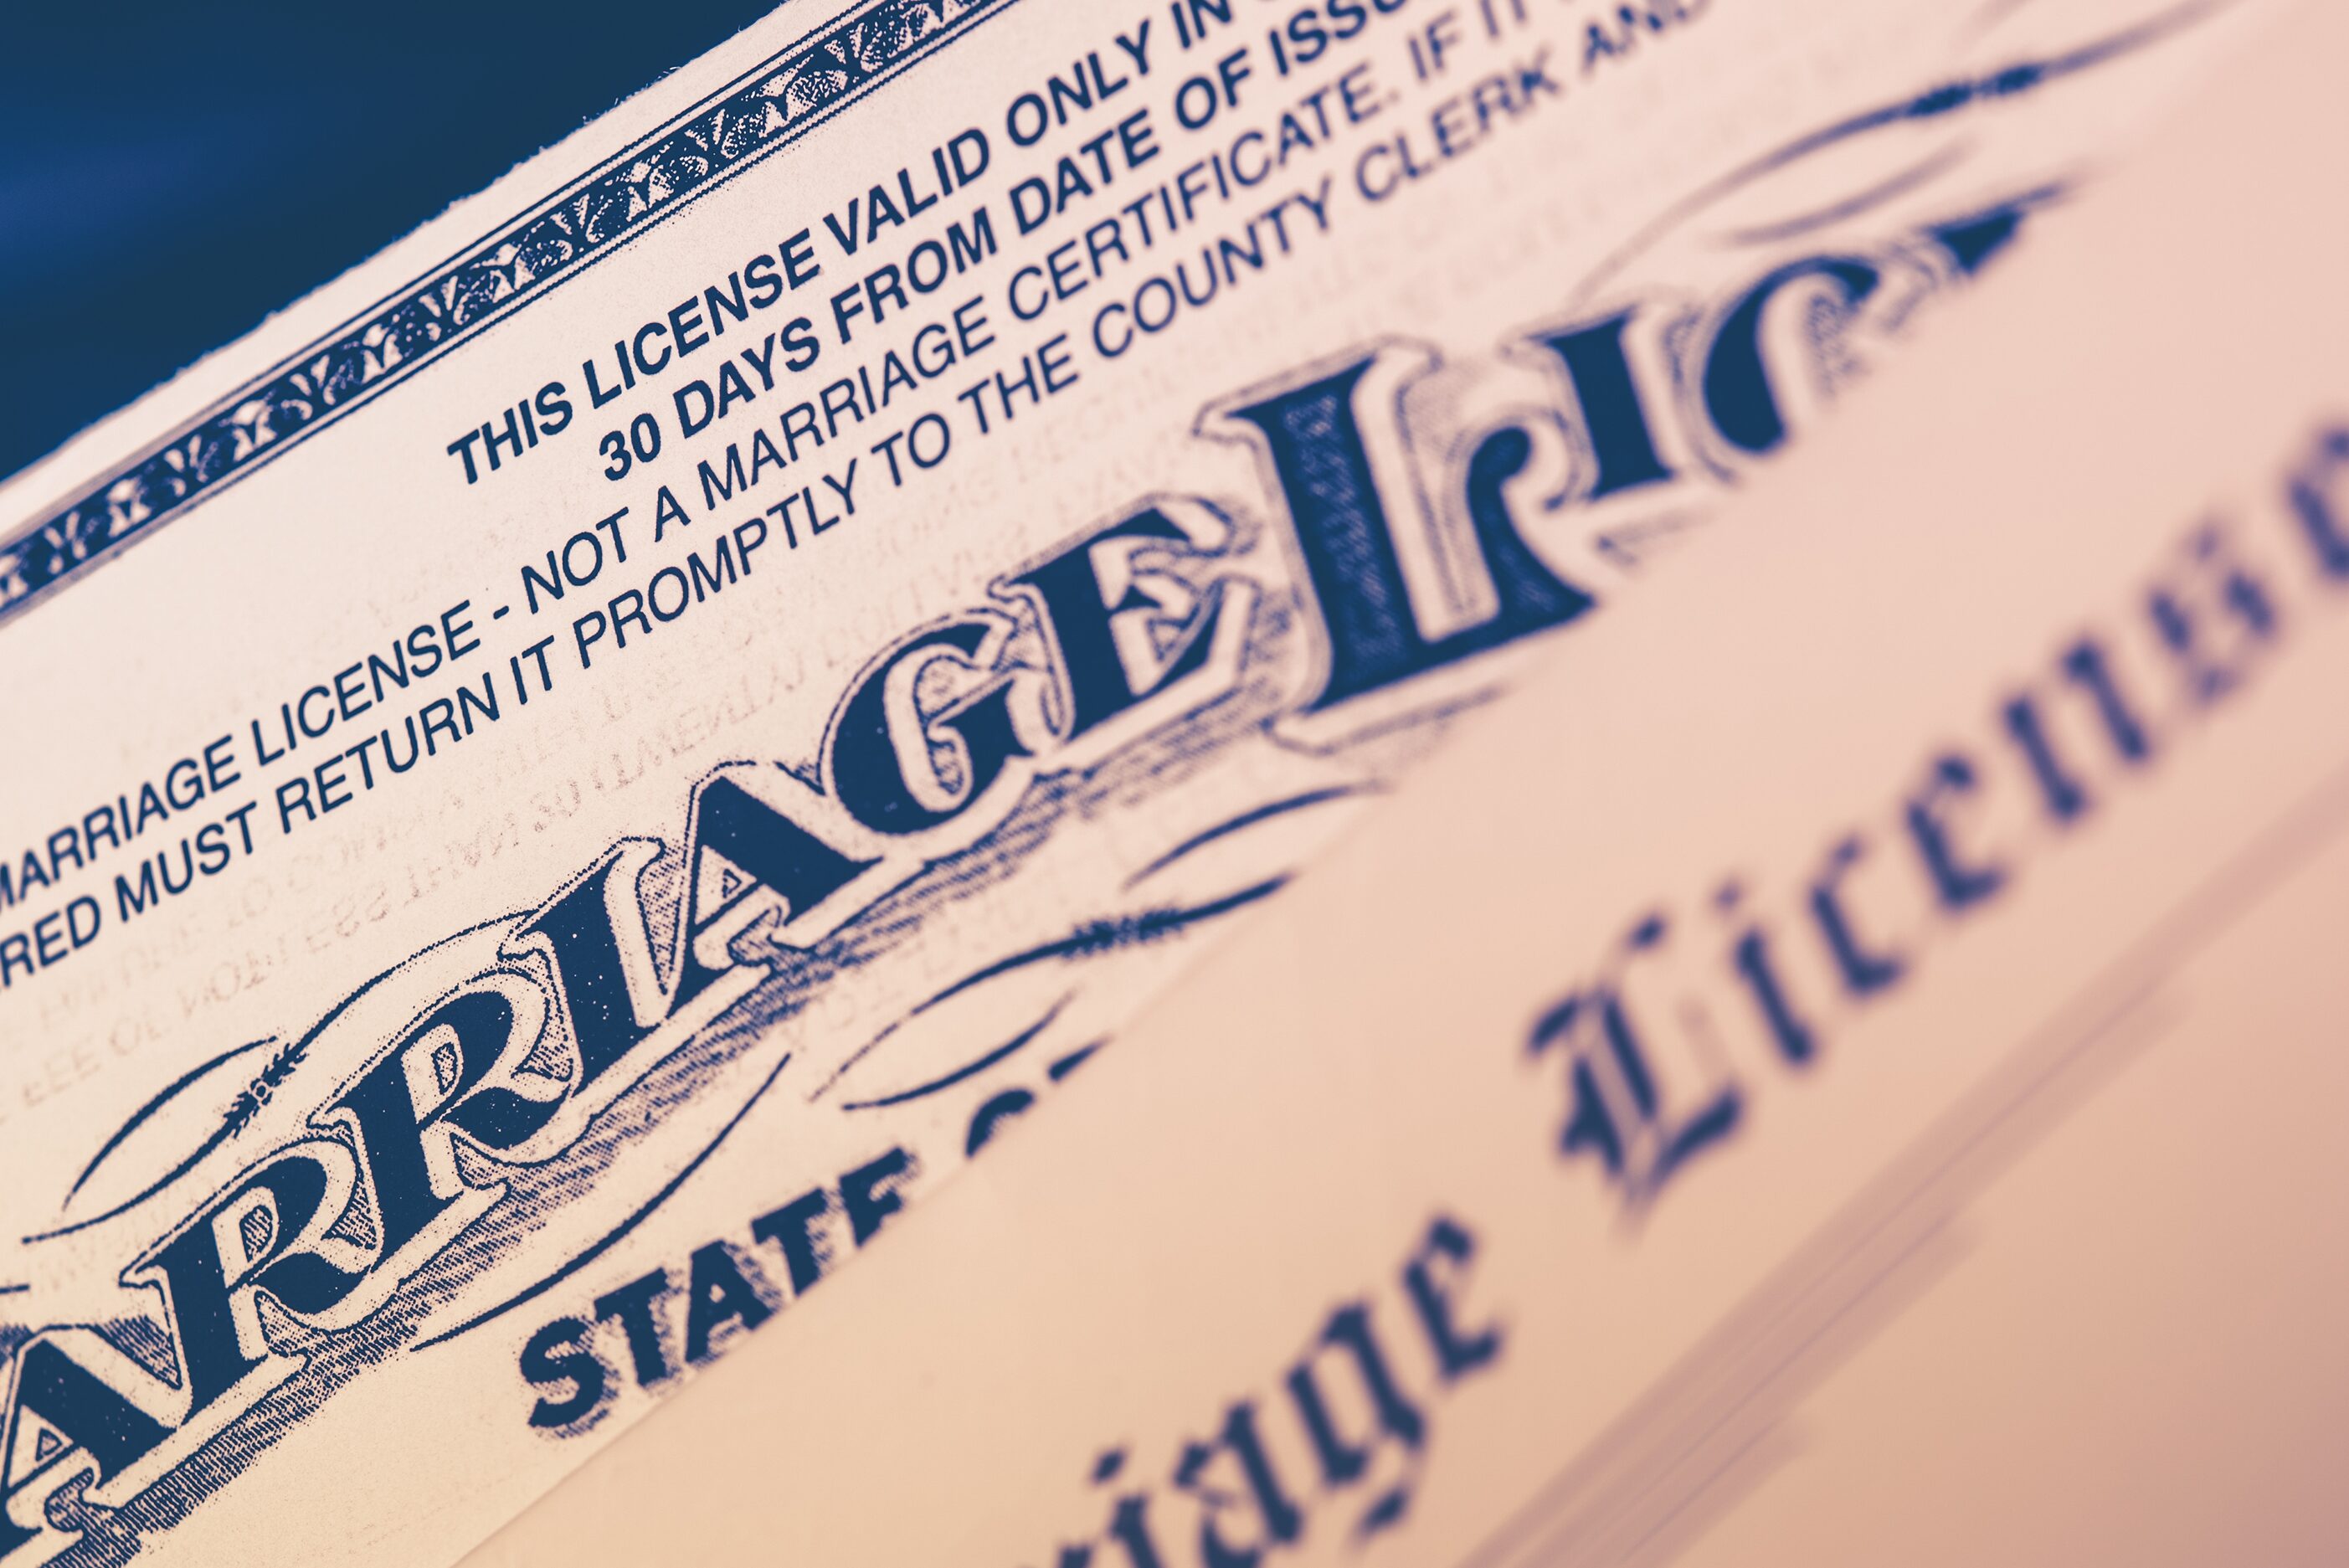 United States Marriage License edited - Texas News, Places, Food, Recreation, and Life.